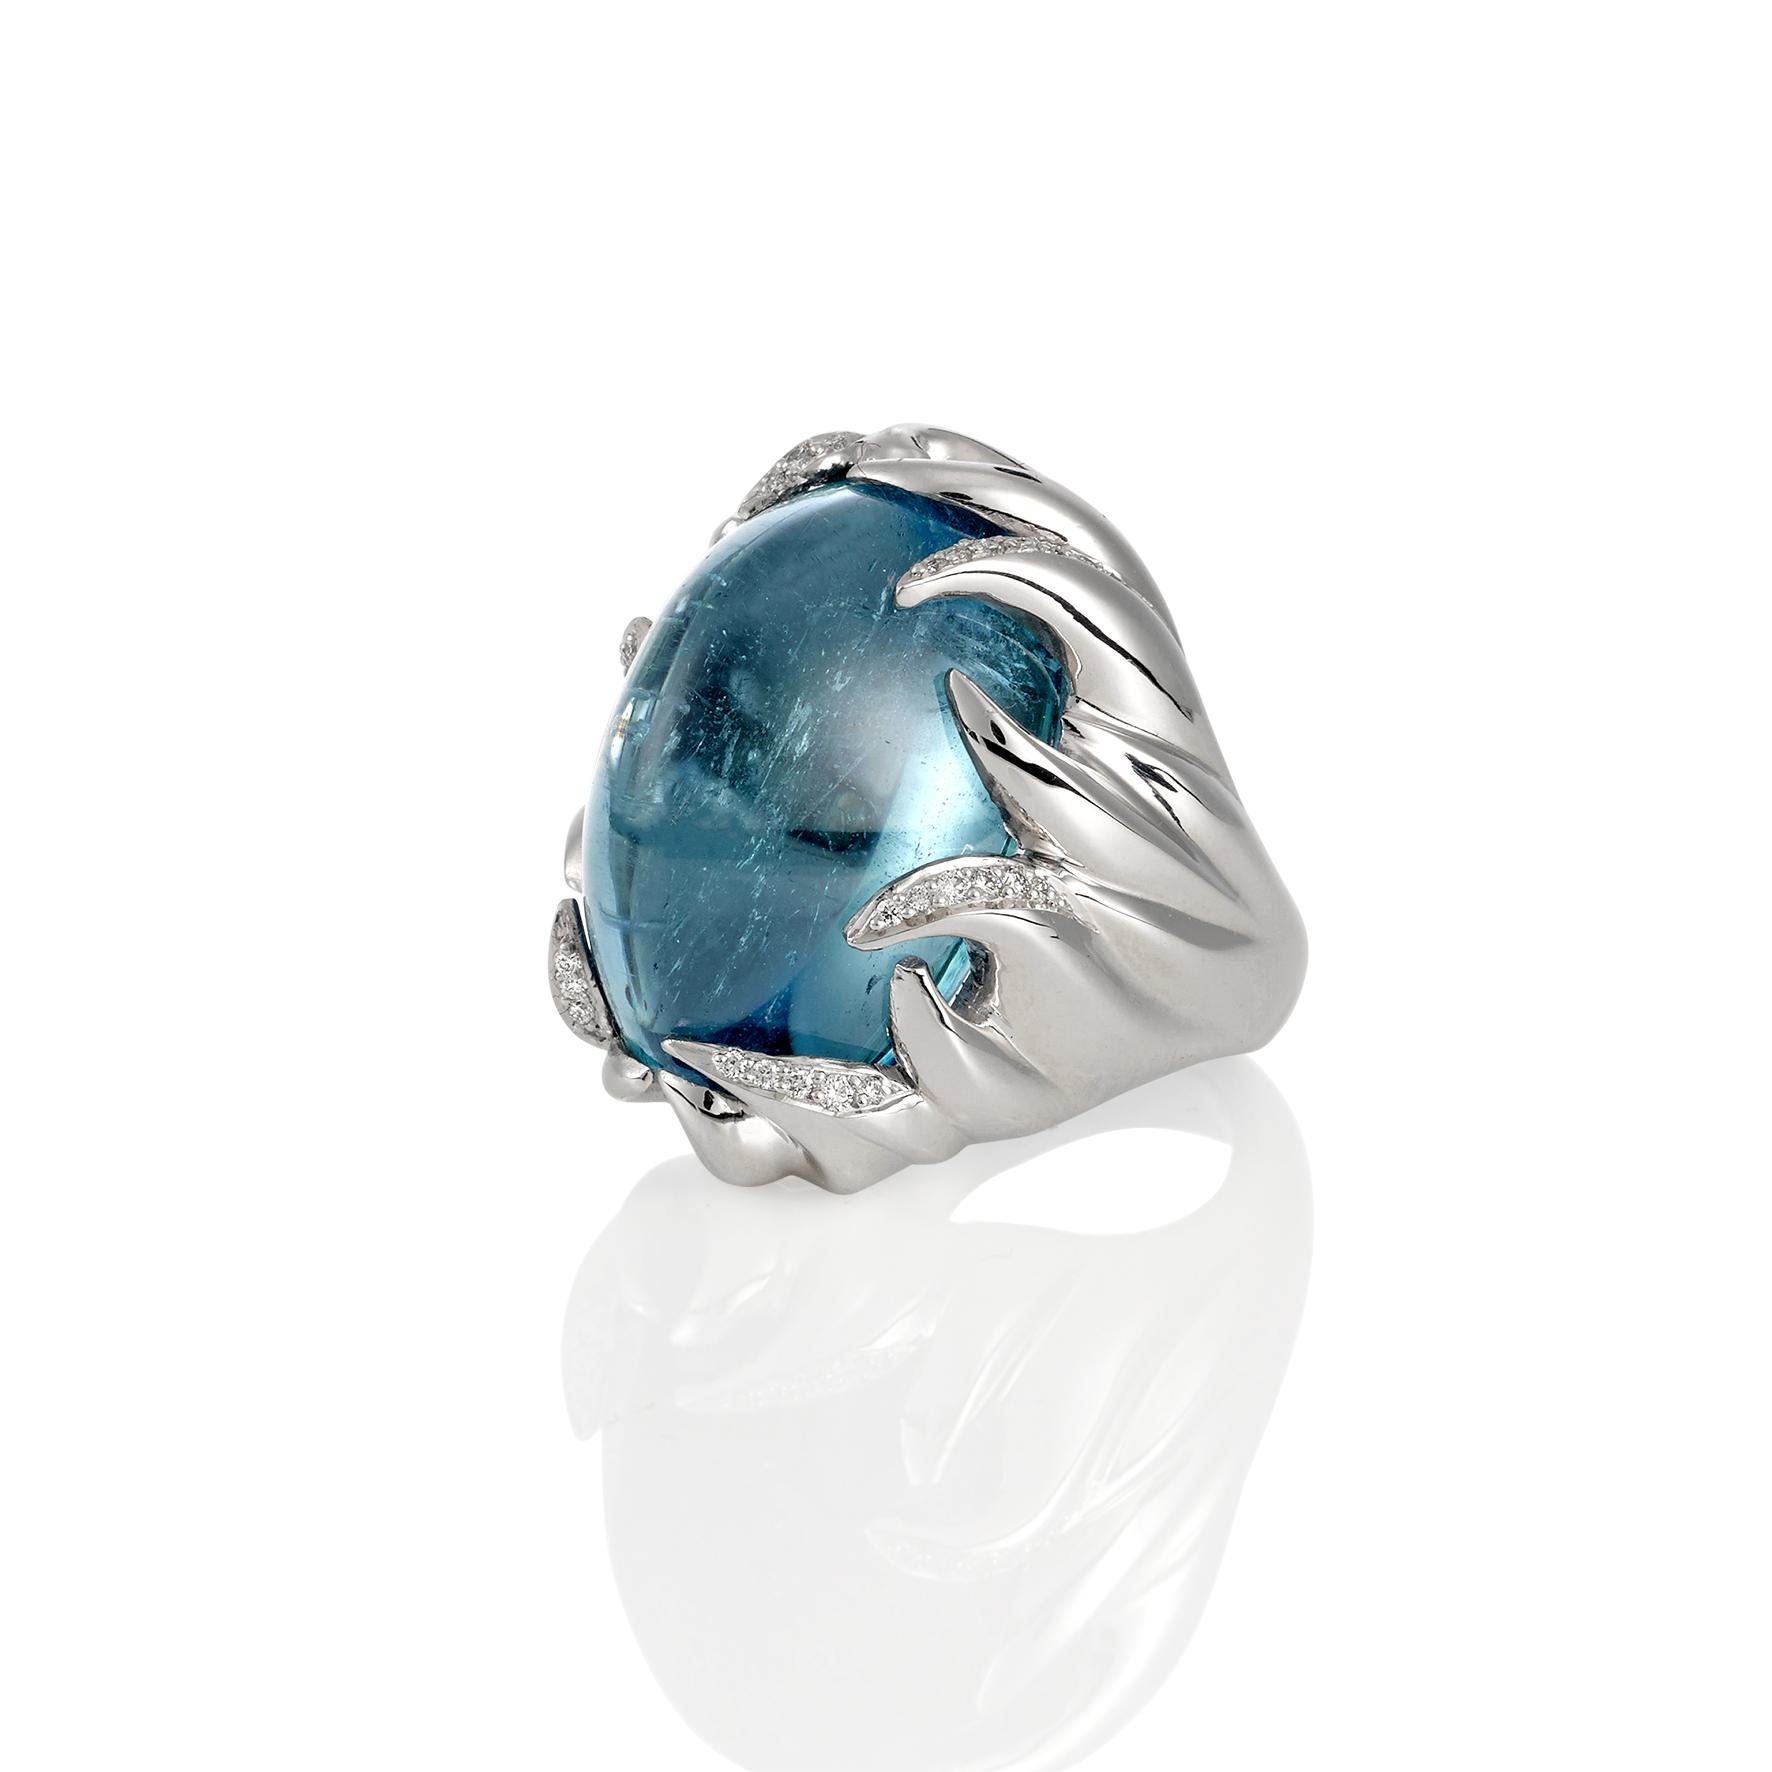 Artist Certified 38.33 Carat Cabochon Aquamarine 'Deep Blue' Cocktail Ring For Sale